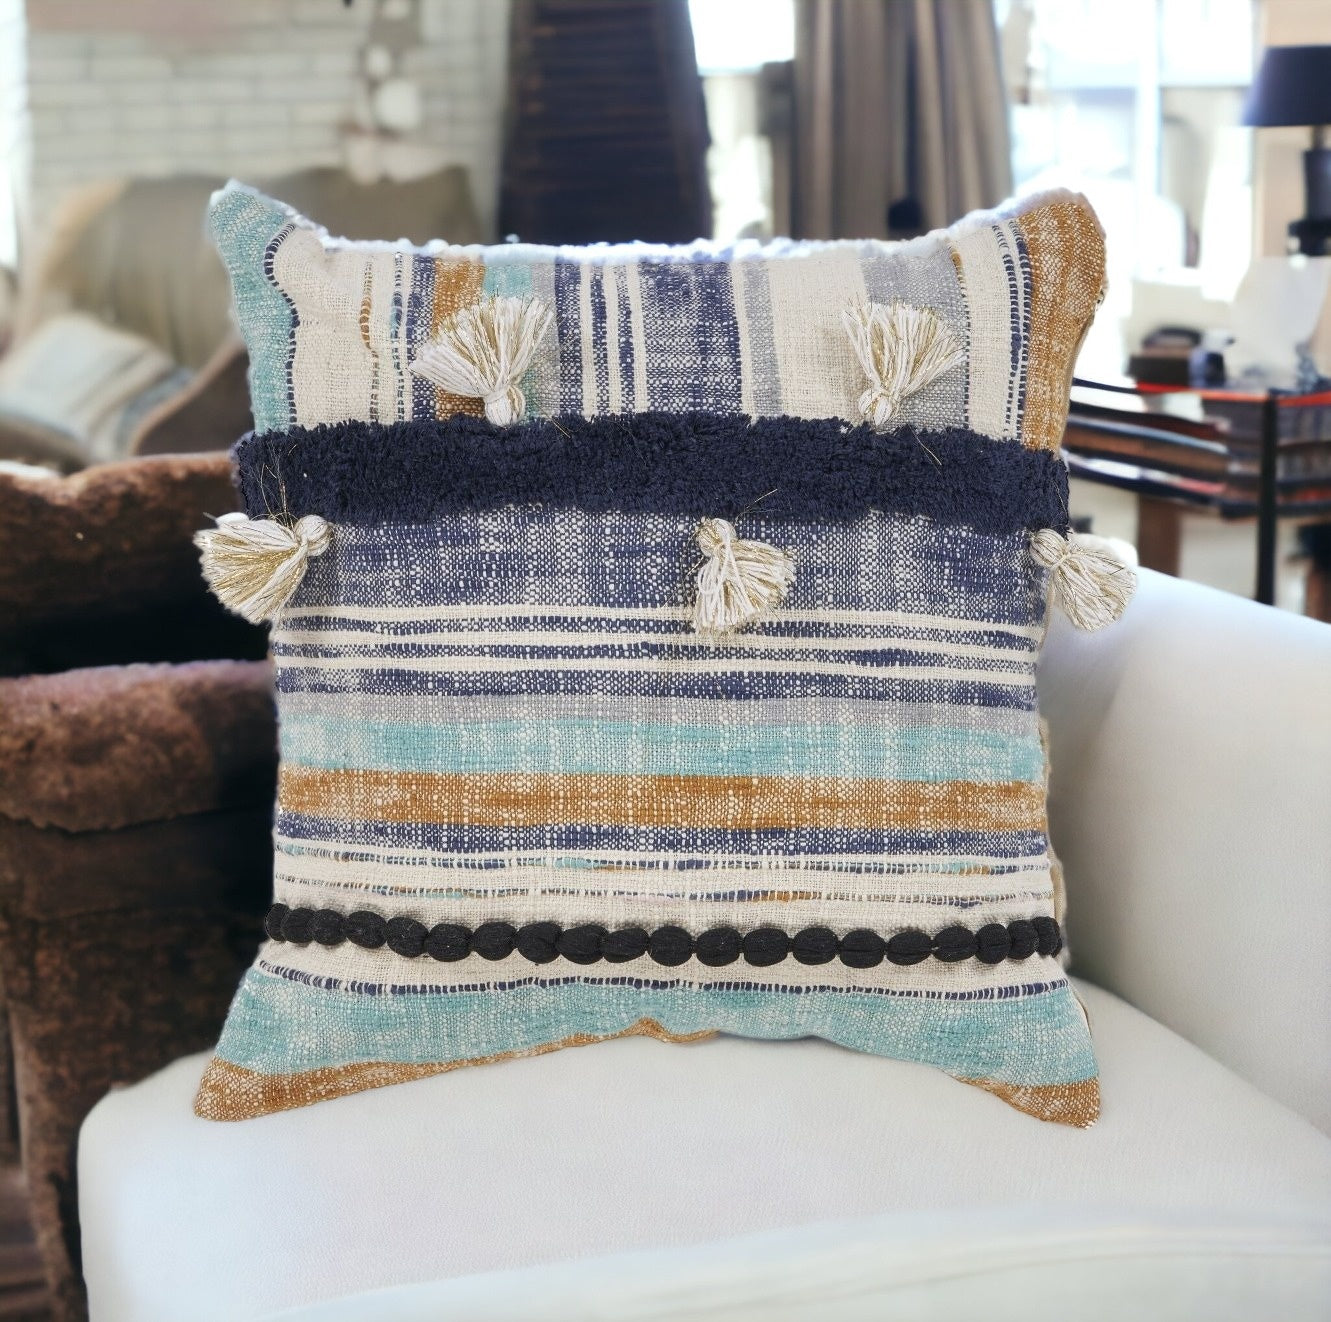 18" X 18" Blue and Beige Patchwork Cotton Zippered Pillow With Tassels